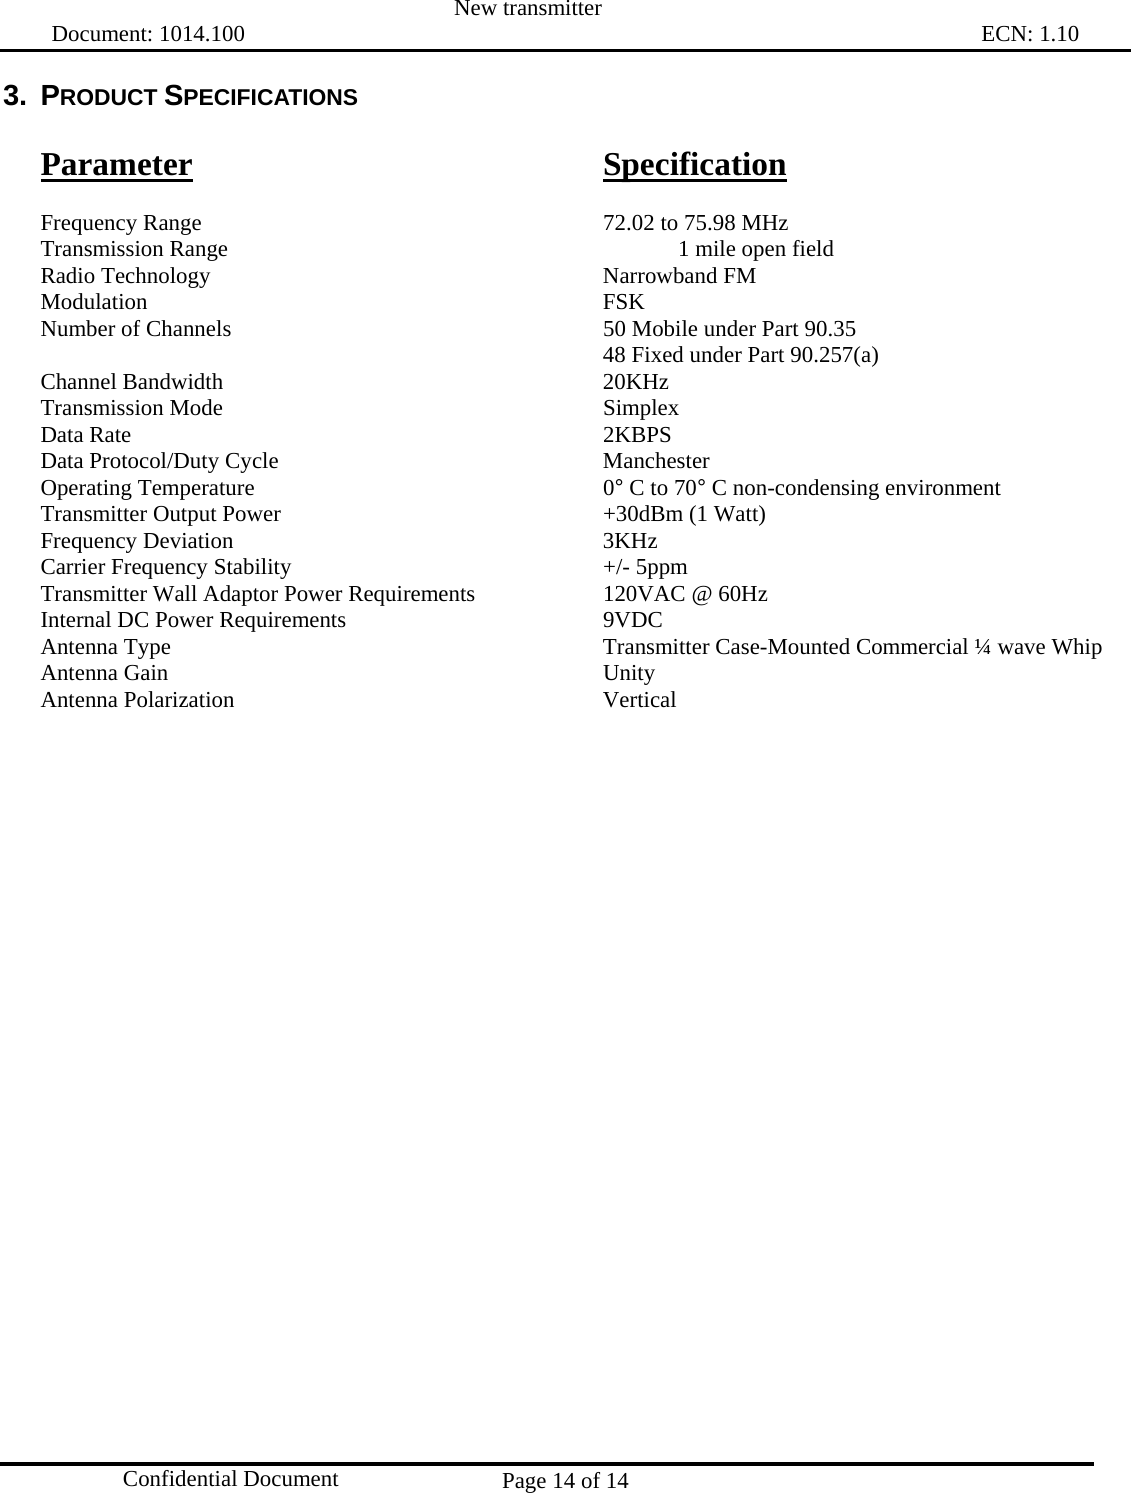  New transmitter   Document: 1014.100                                                                                                                                ECN: 1.10 Page 14 of 14  Confidential Document 3. PRODUCT SPECIFICATIONS  Parameter      Specification  Frequency Range      72.02 to 75.98 MHz Transmission Range      1 mile open field Radio Technology      Narrowband FM Modulation       FSK Number of Channels          50 Mobile under Part 90.35         48 Fixed under Part 90.257(a) Channel Bandwidth      20KHz Transmission Mode      Simplex Data Rate       2KBPS Data Protocol/Duty Cycle     Manchester Operating Temperature      0° C to 70° C non-condensing environment Transmitter Output Power     +30dBm (1 Watt) Frequency Deviation     3KHz Carrier Frequency Stability     +/- 5ppm Transmitter Wall Adaptor Power Requirements    120VAC @ 60Hz Internal DC Power Requirements        9VDC Antenna Type            Transmitter Case-Mounted Commercial ¼ wave Whip   Antenna Gain      Unity Antenna Polarization     Vertical 